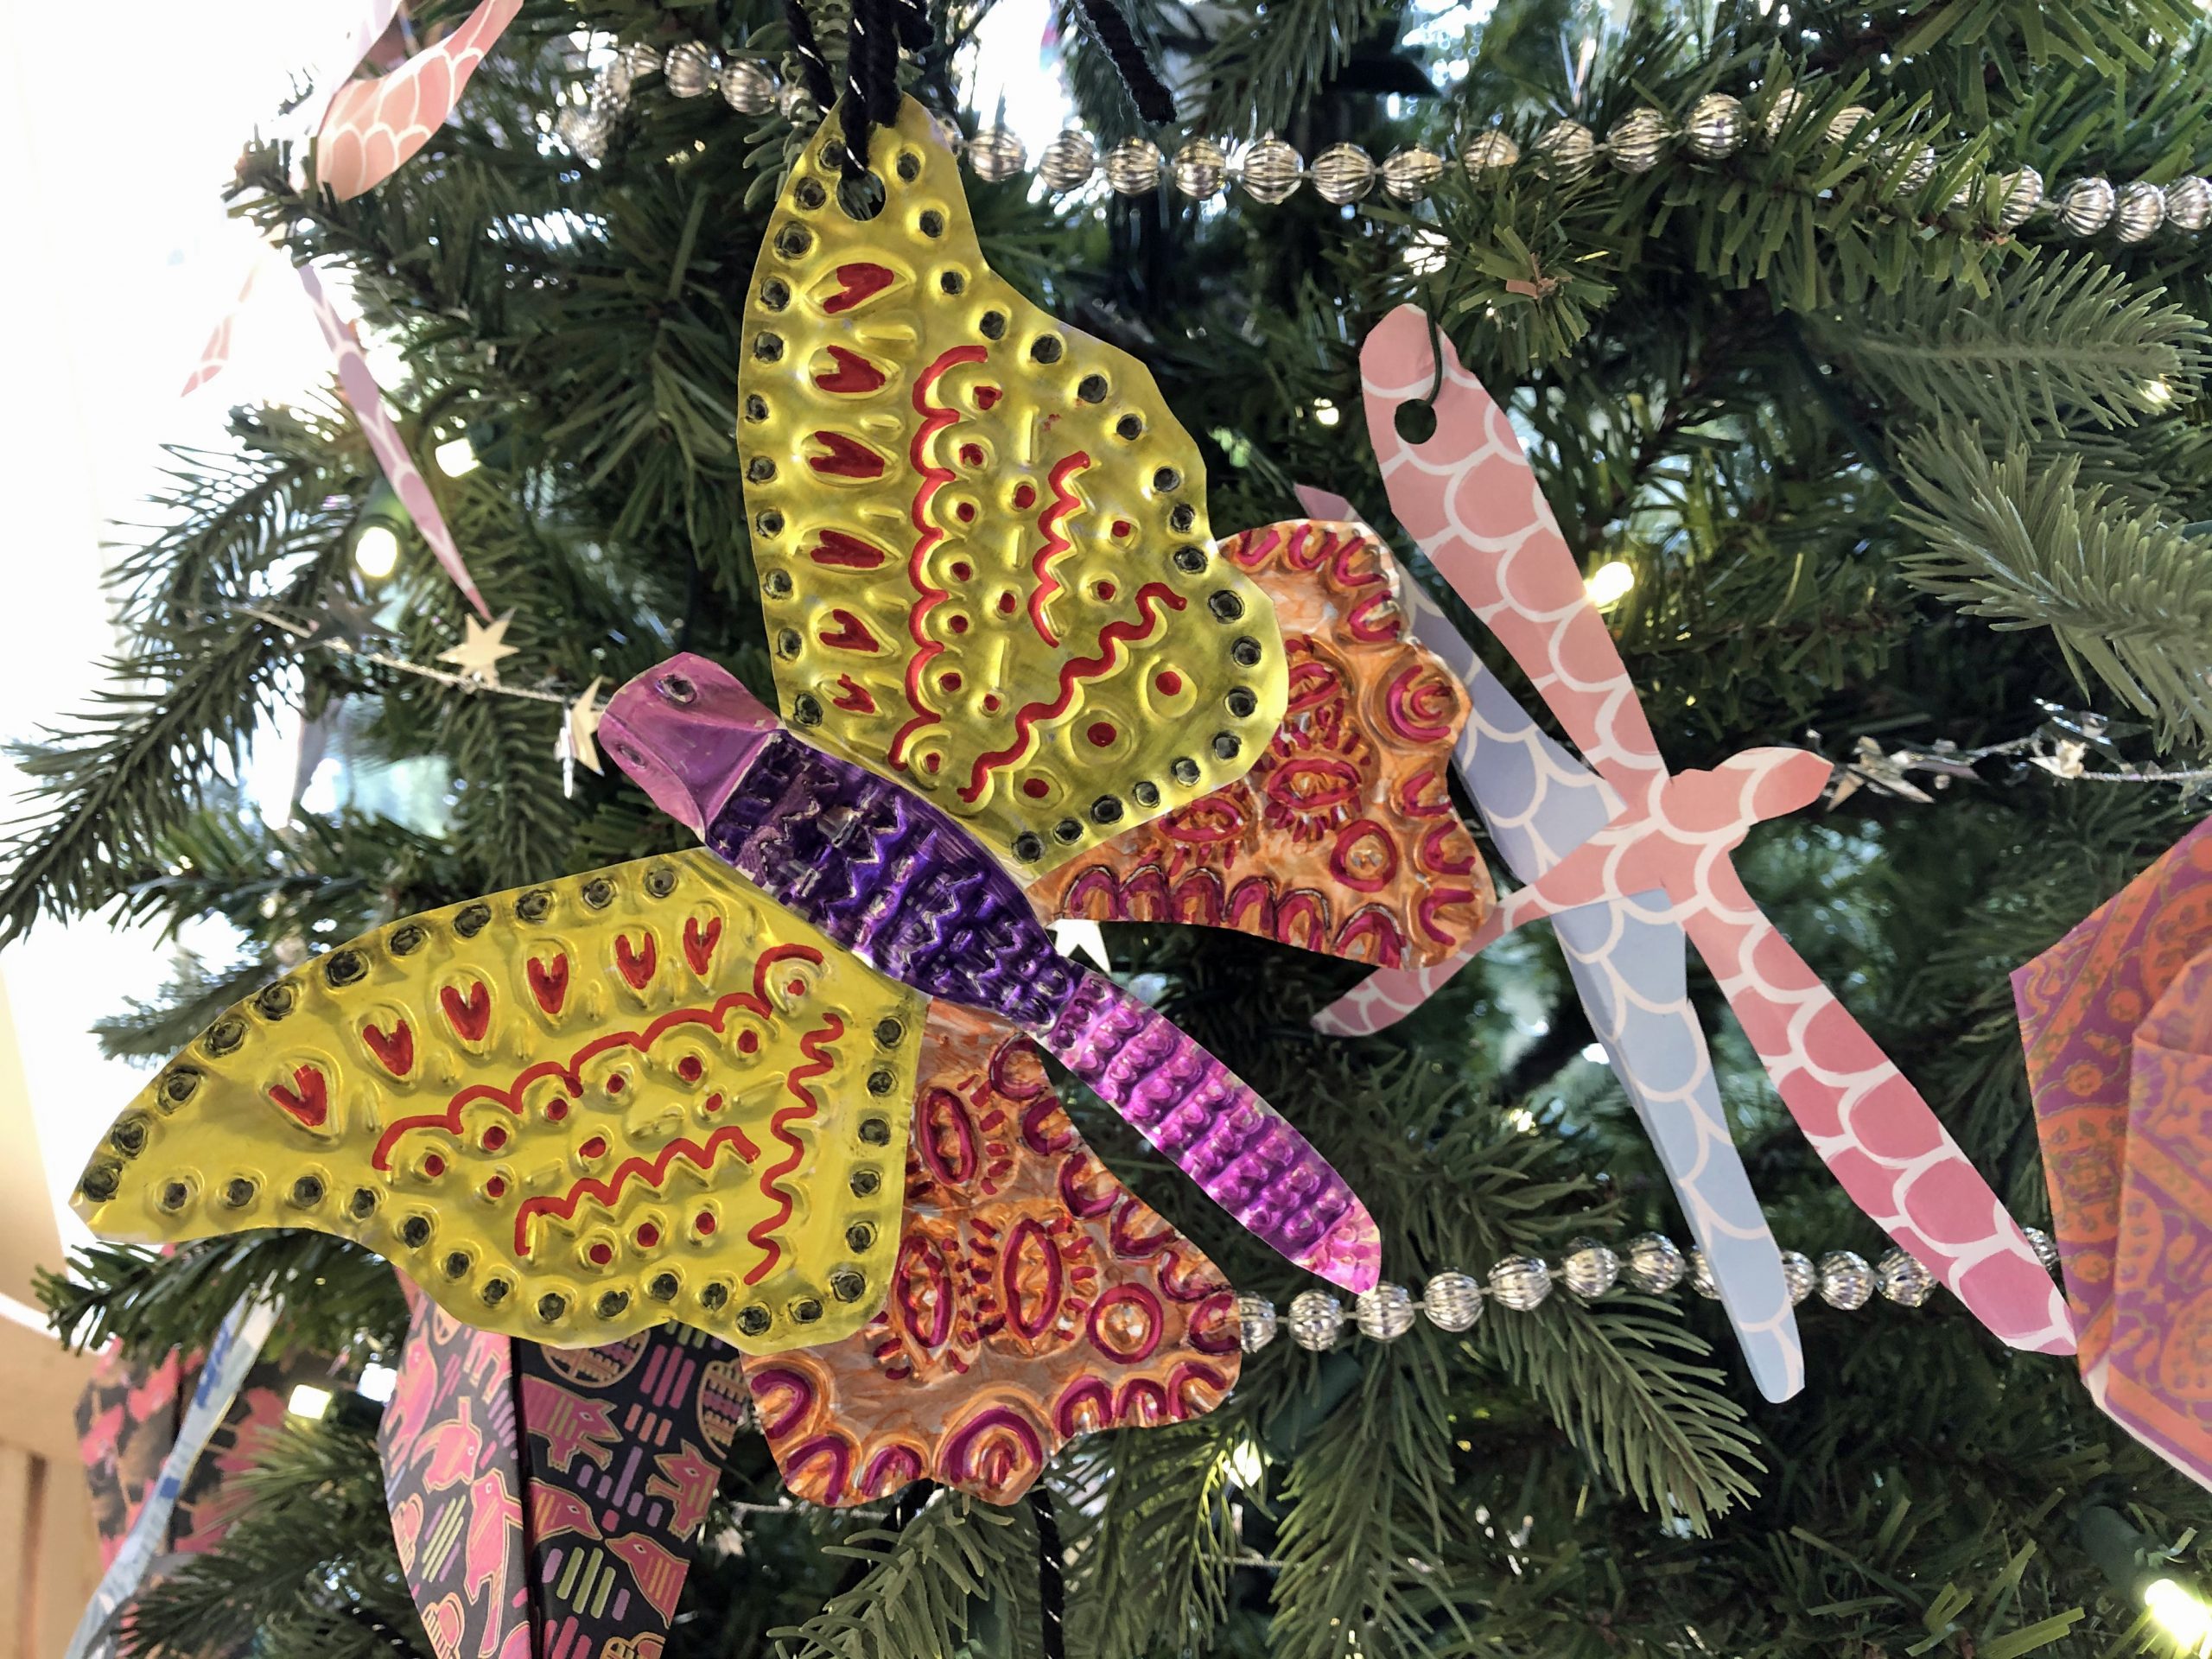 https://www.lewisginter.org/wp-content/uploads/2019/12/Colonial-Trail-Metal-Butterfly-decoration-scaled.jpg